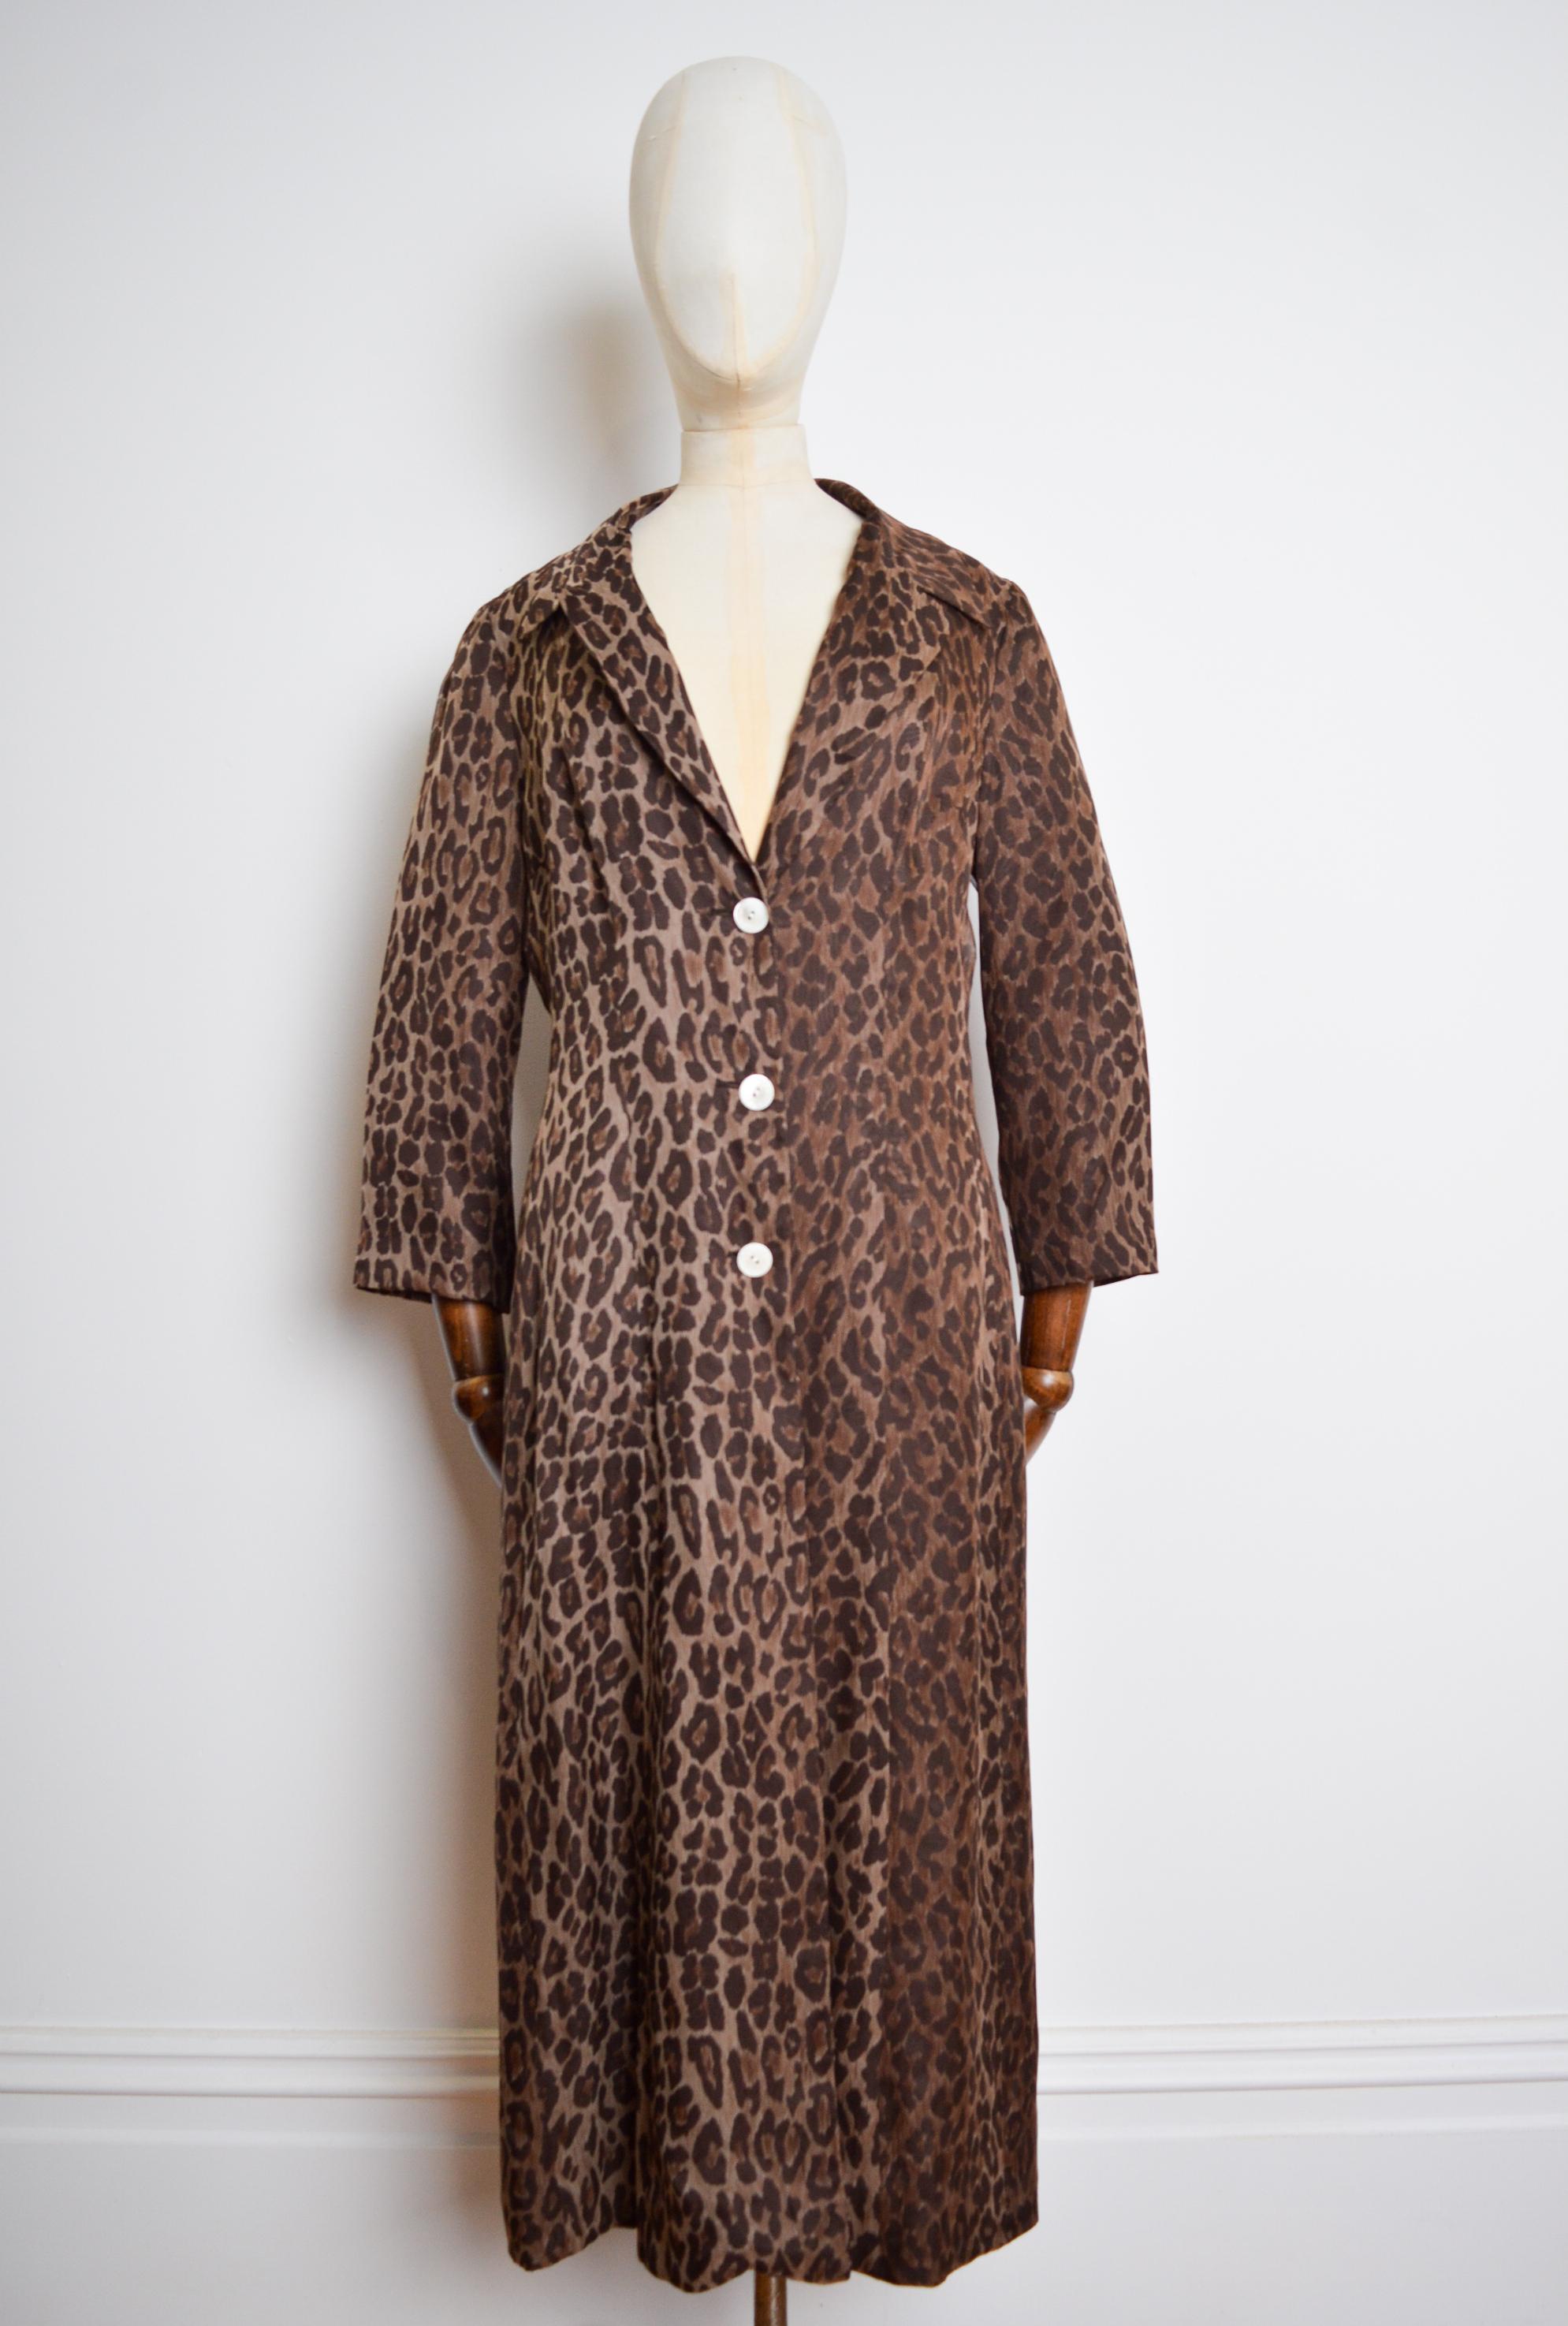 Spring /Summer 1992 Full length Silk Jacket by Dolce & Gabbana, in Leopard print.  

(Look 5 / Model: Kate Moss)

MADE IN ITALY.  

This Luxurious, Vintage Duster coat features 3/4 long sleeves, Carved Mother of pearl 'Dolce & Gabbana' buttons, a